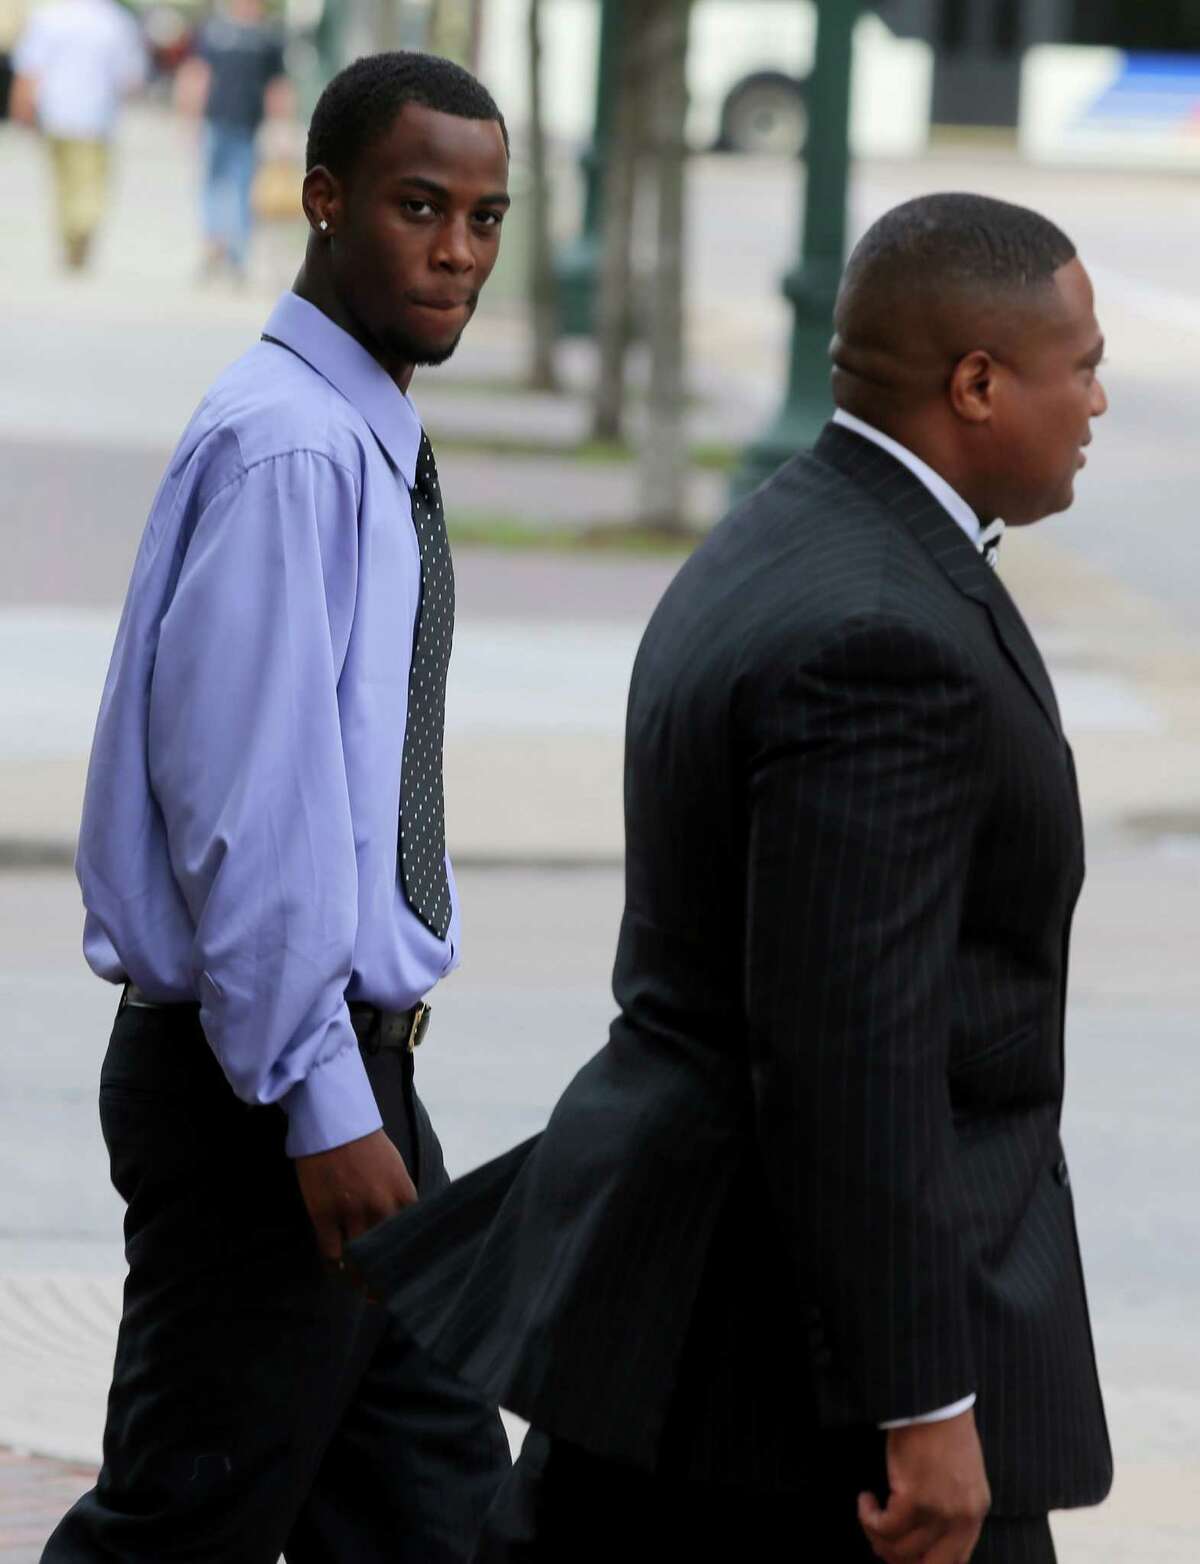 Chad Holley walks with Quanell X after leaving the 178th District Court on Friday.